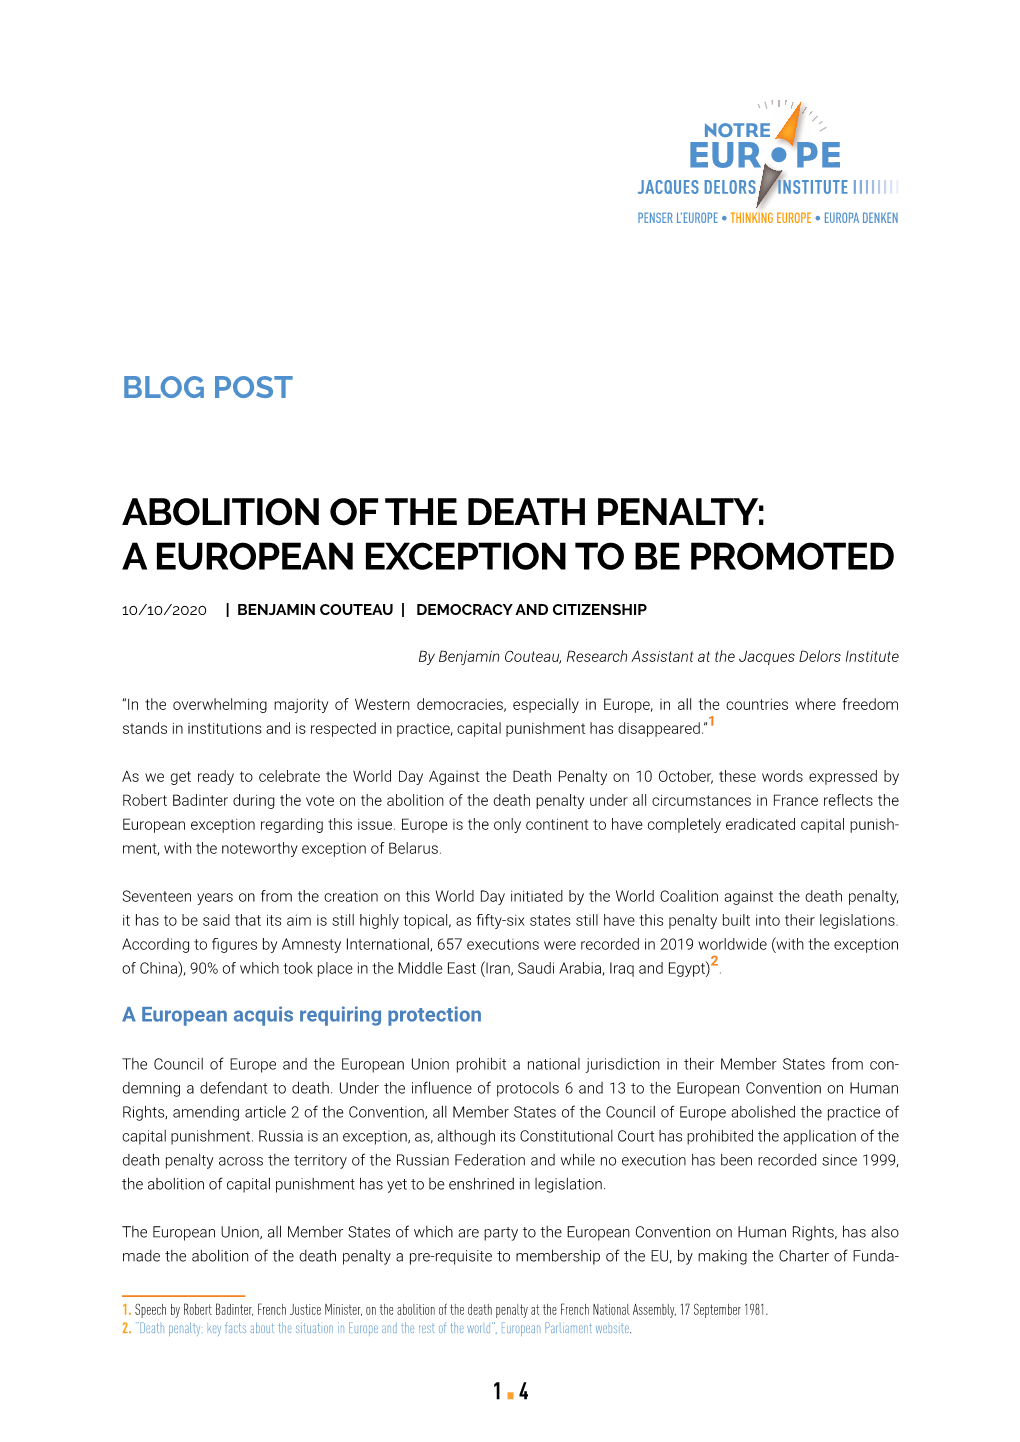 Abolition of the Death Penalty: a European Exception to Be Promoted